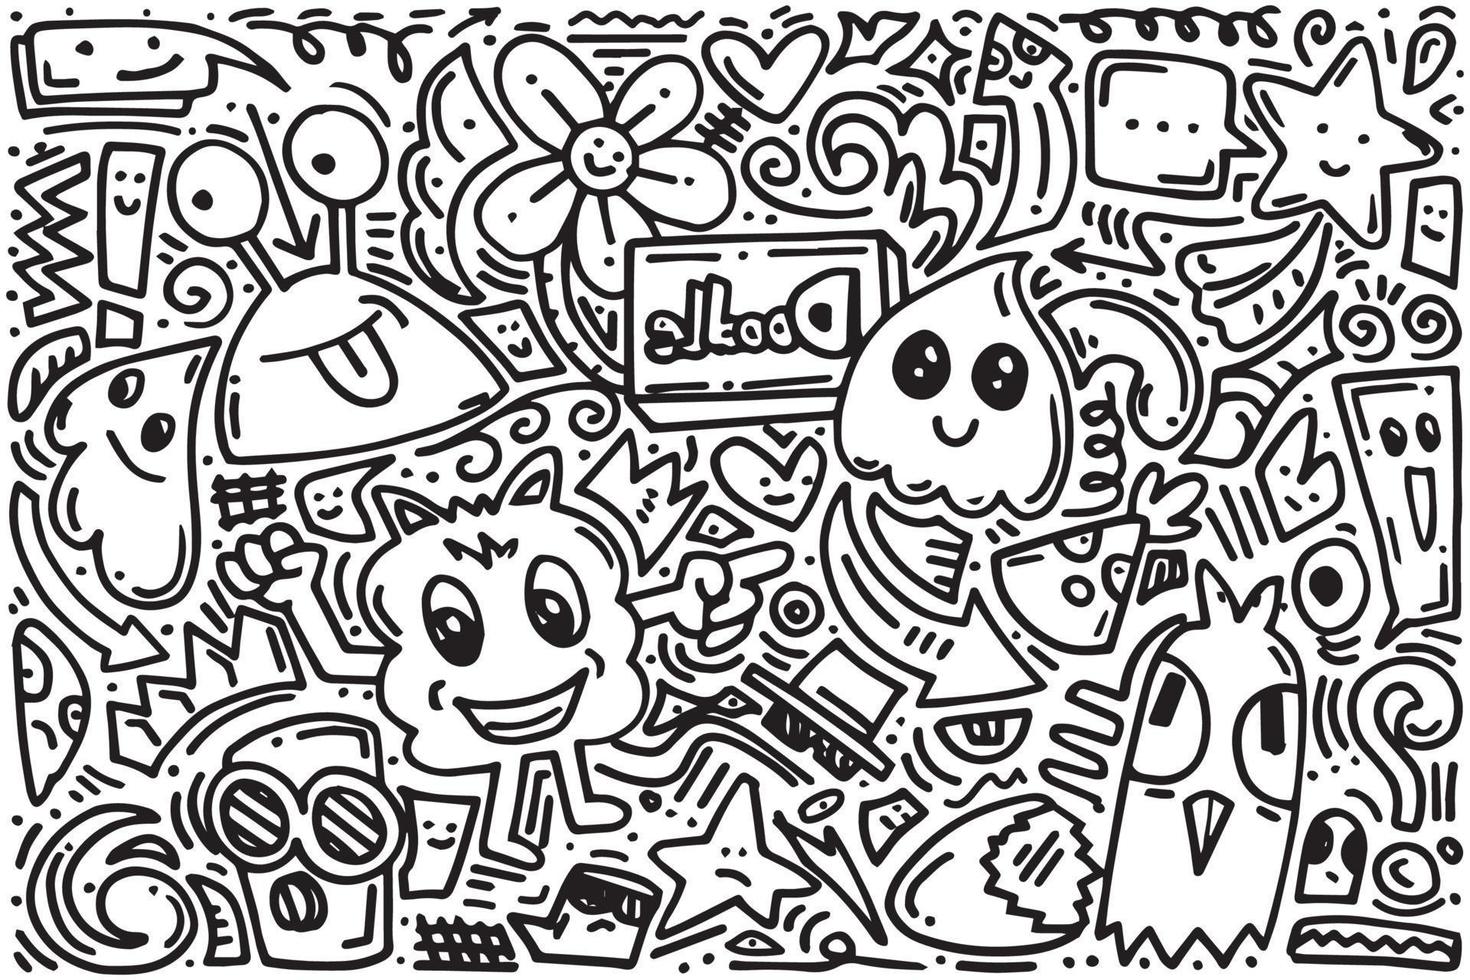 Hand drawn set elements, Abstract arrows, ribbons, hearts, stars, crowns, monsters and other elements in hand drawn style for concept design. Scribble illustration. Vector illustration.